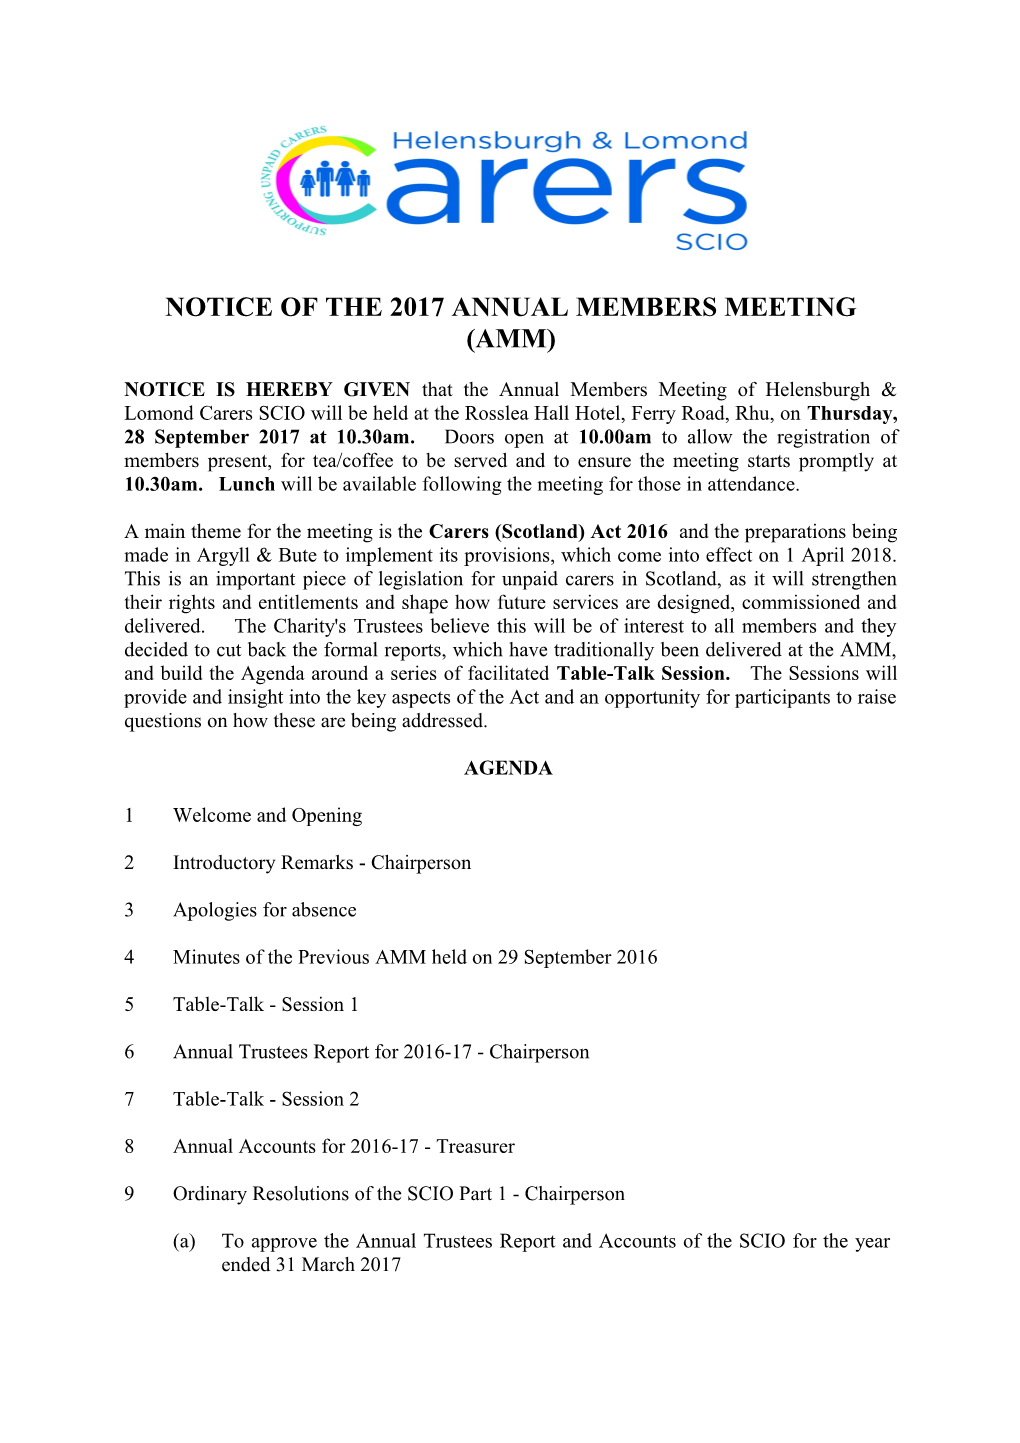 Notice of the 2017 Annual Members Meeting (Amm)